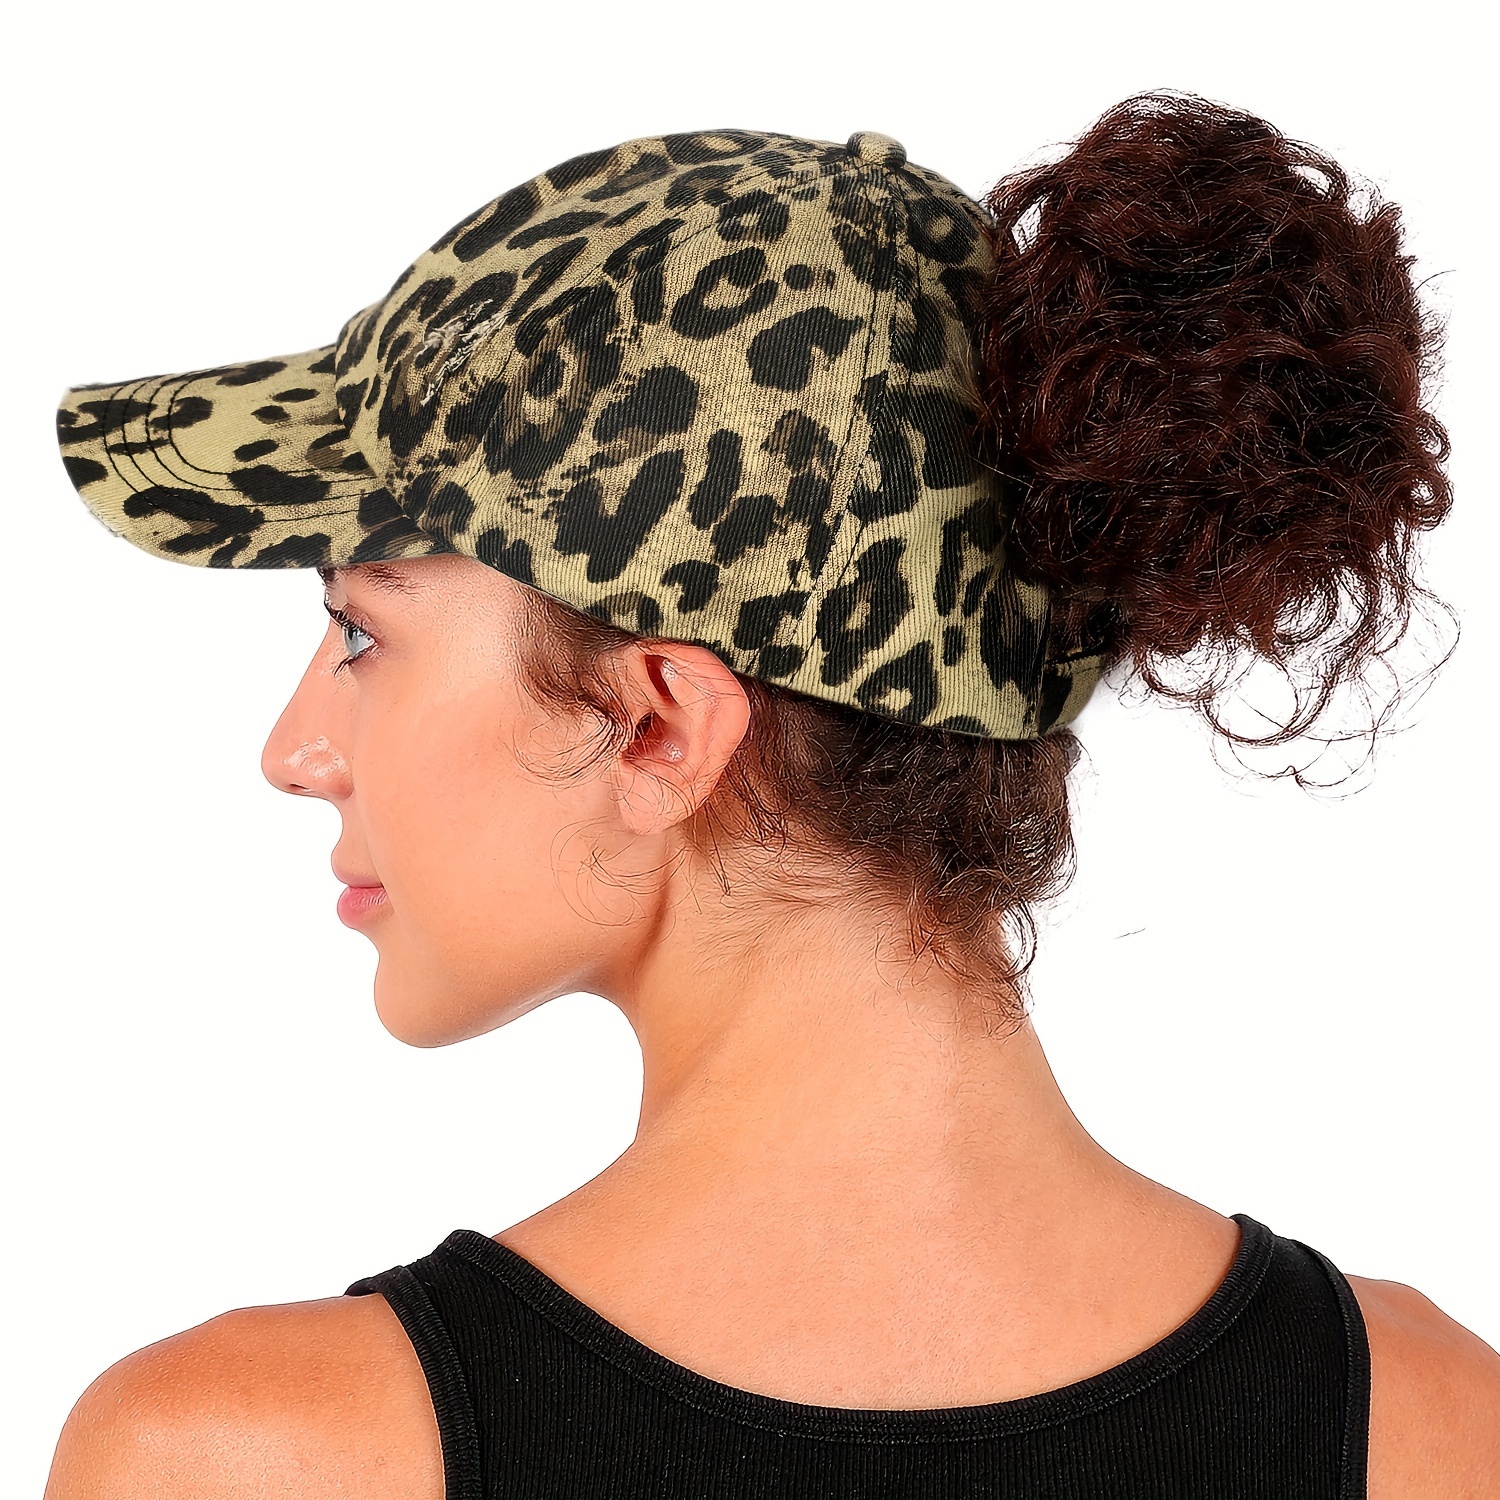 

1pc Adjustable Distressed Ponytail Baseball Cap, High-quality Washed Cotton Peaked Hat, Lightweight & Breathable Sun Protection Outdoor Hat With Leopard Print Design